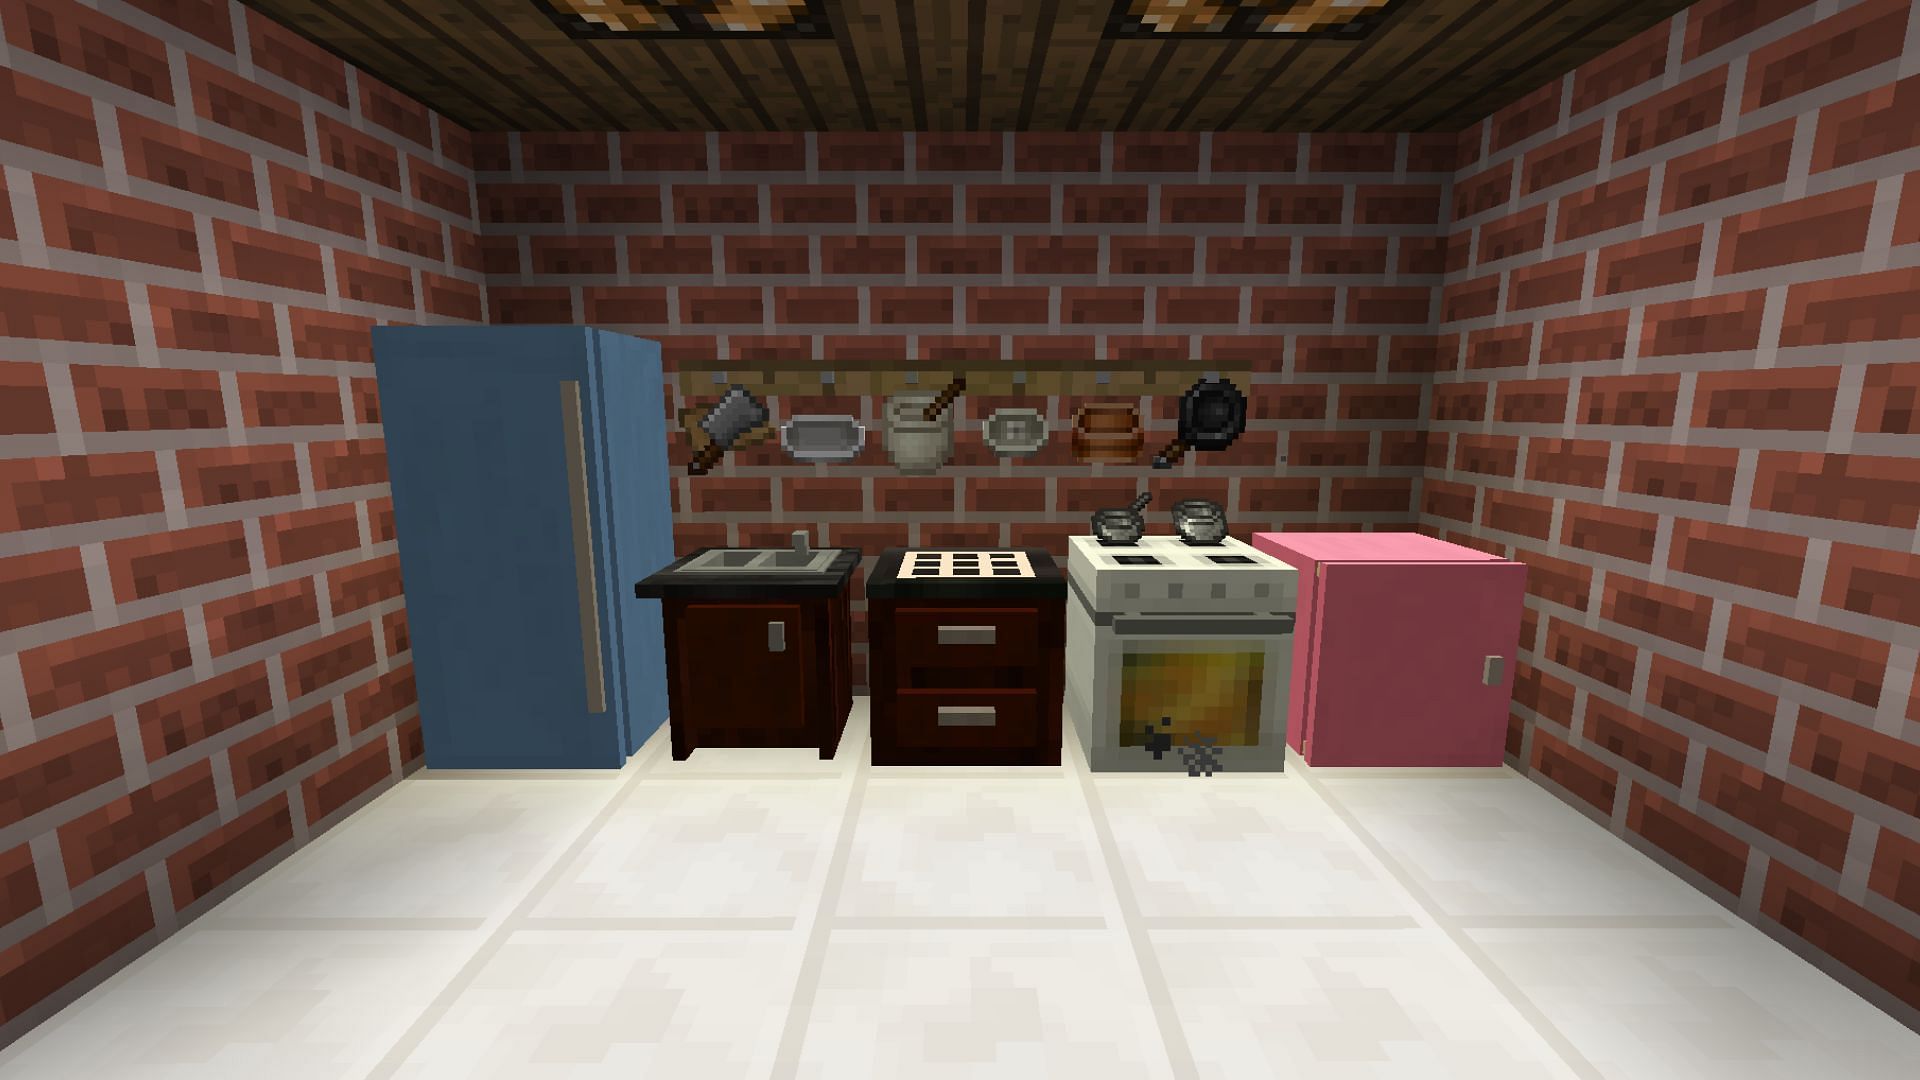 A fully operational kitchen can be built using this Minecraft mod (Image via CurseForge)